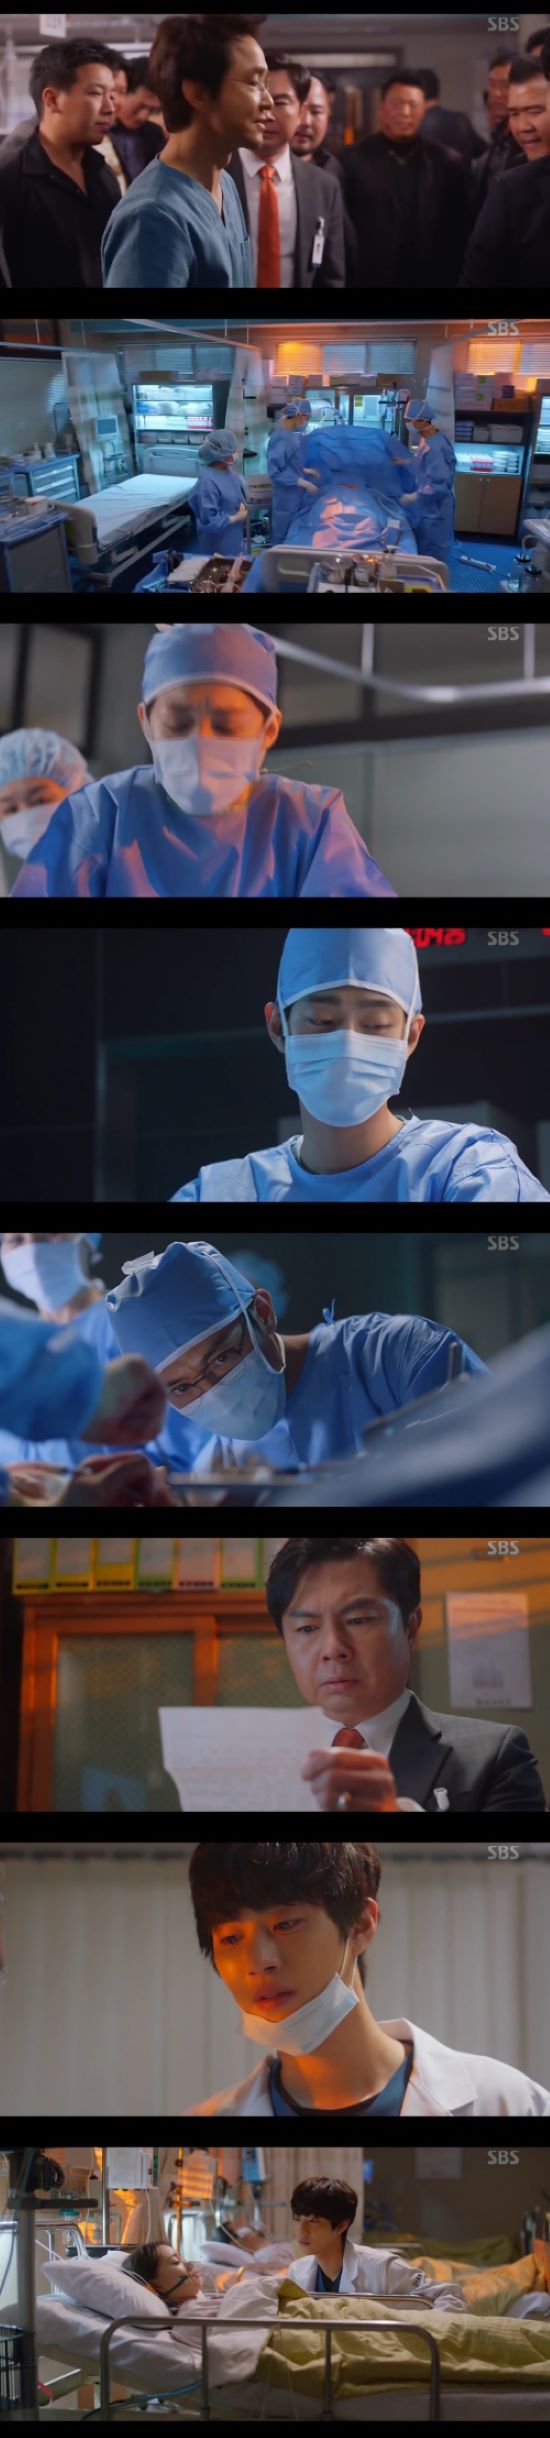 Kim Joo-heon sat in the presidency of Romantic Doctor Kim Sabu 2 and predicted a full-scale conflict.In SBS Mondays drama Romantic Doctor Kim Sabu 2, which was broadcast on the 21st, Park Min-guk (Kim Joo-heon), who took office as the director of Doldam Hospital, and Cha Eun-jae (Lee Sung-kyung), who suffered a deep injury to his neck, were spread.Detective in Gunshot and a gangster stabbed appeared at Doldam Hospital on the day.Detectives and gangsters all came to him, saying, Where is Han Suk-kyu?The situation was over when Kim Sabu, who returned from the operating room, said, Why are you so loud? Do you know it is a hospital?Kim, who first visited Gunshot patients, started emergency treatment in a hurry. He decided to perform surgery in a serious situation, and Park Min-guk appeared.Park Min-guk said, Do you have to go into the operating room? There is serious damage in the major this year, but take care of the patients who can save them at that time.Kim declared that he would move the patient to the operating room without listening to Park Min-guk. Then, when he told Cha Eun-jae that he would leave another patient, Park Min-guk said, Are you sane now?Is it reasonable to leave a patient to a person with surgery? Kim said, I find an excuse when I give up and find a way to live when I think I can.If you are so worried, you can take it yourself. Do not think about running away like that.When Chung In-soo (Yoon-Num) asked, Do you really think youre okay? Cha Eun-jae said, Didnt Kim Sa-bu tell you to do it?My shooter at Doldam Hospital is Kim Sabu. Is not it because I believe in this order? Then Cha started first aid. The staff looked at him anxiously, and Cha Eun-jae boldly proceeded.On the way, I was again depressed and once again came to a trouble, but Cha Eun-jae found the wound and succeeded in suture.Kim and Seo Jin (Ahn Hyo-seop) started searching for bullets embedded in the body of Gunshot patients. At this time, Park Min-guk was watching Kims surgery outside.Kim called Park Min-guk and asked him to follow his own suit, saying, Are you going to keep watching like that?Park Min-guk, who accepted the proposal, performed surgery on Gunshot patients with Seo Woo Jin.Park Min-guk, who finished the surgery, asked Kim Sabu, What if I did not come in?Kim said, What would you have done while you were in the room? Park Min-guk asked, How many dead patients have you made such a reckless and dangerous decision so far?Kim said, There are a lot more people who have saved, Park said firmly. It was a much more dangerous person than I thought.I thought I should catch the system that goes back to the old-fashioned way first, and I will catch Dr. Suk-kyu from you. Seo Woo Jin visited a Pauldown patient who had earlier attempted suicide with him; when the patient asked, Let me die, why did you save him? Seo Woo Jin said, Its sick.If you die like this, you do not know. How sick is it? A suicide with family? Dont be ridiculous. Youve committed violence against powerless children. Dont make excuses for life, depression. Youre just weak and bad.Youll be hurting yourself and suffering for the rest of your life, and youll pay for it, so its fair to the dead child.The next day, Oh Myung-sim (Jin-kyung) took the vitamins for Still Operating (Kim Hong-pa) and went into the directors office.Then I saw the post-it attached to the pot left by Still operating, and Oh Myung-sim hurriedly visited Kim Sabu.Kim Sabu gave a letter to Still Operatings hat that he received yesterday, in the misgivings of shouting, Do you know anything?When Kim Sabu tried to stop him, he said, No matter what, this is not the case.We shouldnt have sent you like this. How could you do this? Without a word. Meanwhile, Cha Eun-jae, who entered the bathroom, heard someone crying in the bathroom. The main character is the mother of the child who was subjected to domestic violence.When he saw his husband bleeding his nose, Cha Eun-jae could not bear his anger and went to his husband.As the emotions grew stronger, the husband and Cha Eun-jaes struggle broke out, and the wife who watched them pushed the cutter knife.At that time, the sword wielding at her husband was blocked by the car, and the car fell down with a deep wound on her neck.Park Min-guk, who became the director, officially introduced Park Min-guk, who was appointed as the director of the Doldam Hospital from today. I promise one thing while I am here.I will raise my salary and extra-work allowance by 5 percent. As the head of Doldam Hospital, I will try to improve your treatment and resolve the deficit of Doldam Hospital. Others, including Oh Myung-sim and Seo Woo Jin, showed a trembling look.At the end of the broadcast, Park Min-guk, who is leaning on the chair of the directors office, was drawn and added to the future development.Romantic Doctor Kim Sabu 2 will be broadcast every Monday and Tuesday at 9:40 pm.Photo: SBS Romantic Doctor Kim Sabu 2 captures broadcast screen